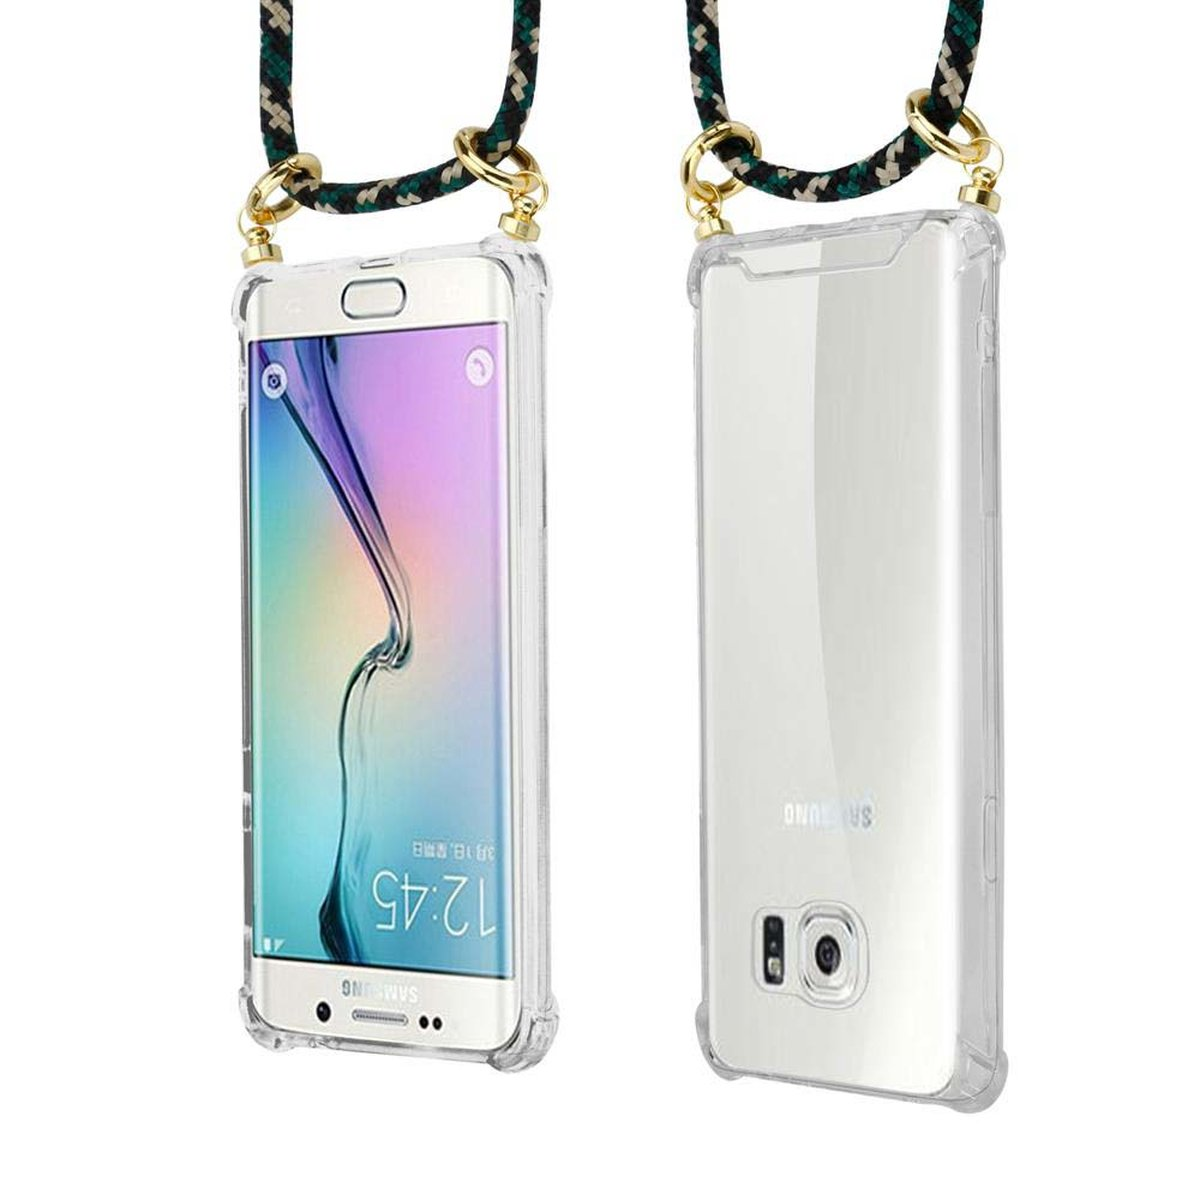 abnehmbarer S6, Ringen, Handy Kette und CAMOUFLAGE mit Backcover, Gold CADORABO Galaxy Samsung, Band Hülle, Kordel